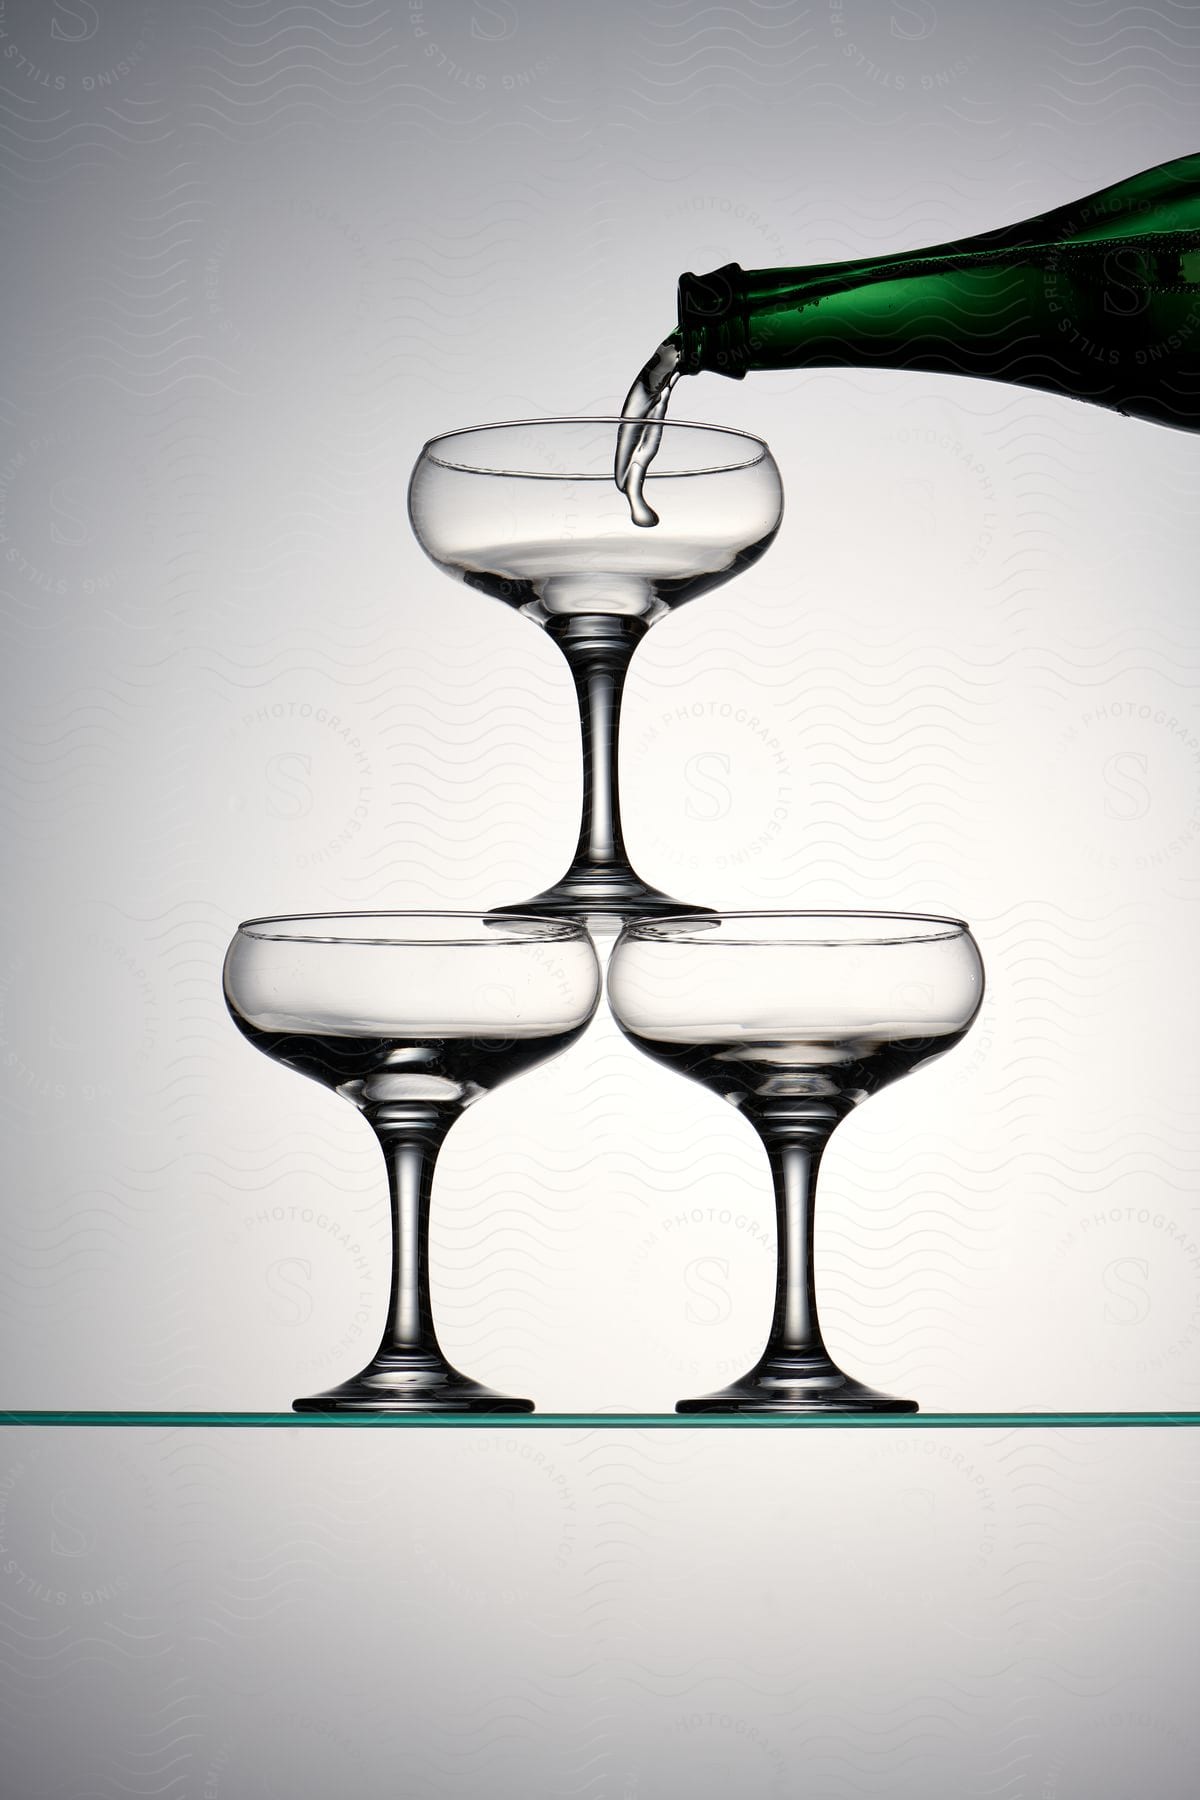 a green bottle of wine is being poured into three wine glasses on a table with a glass bottom